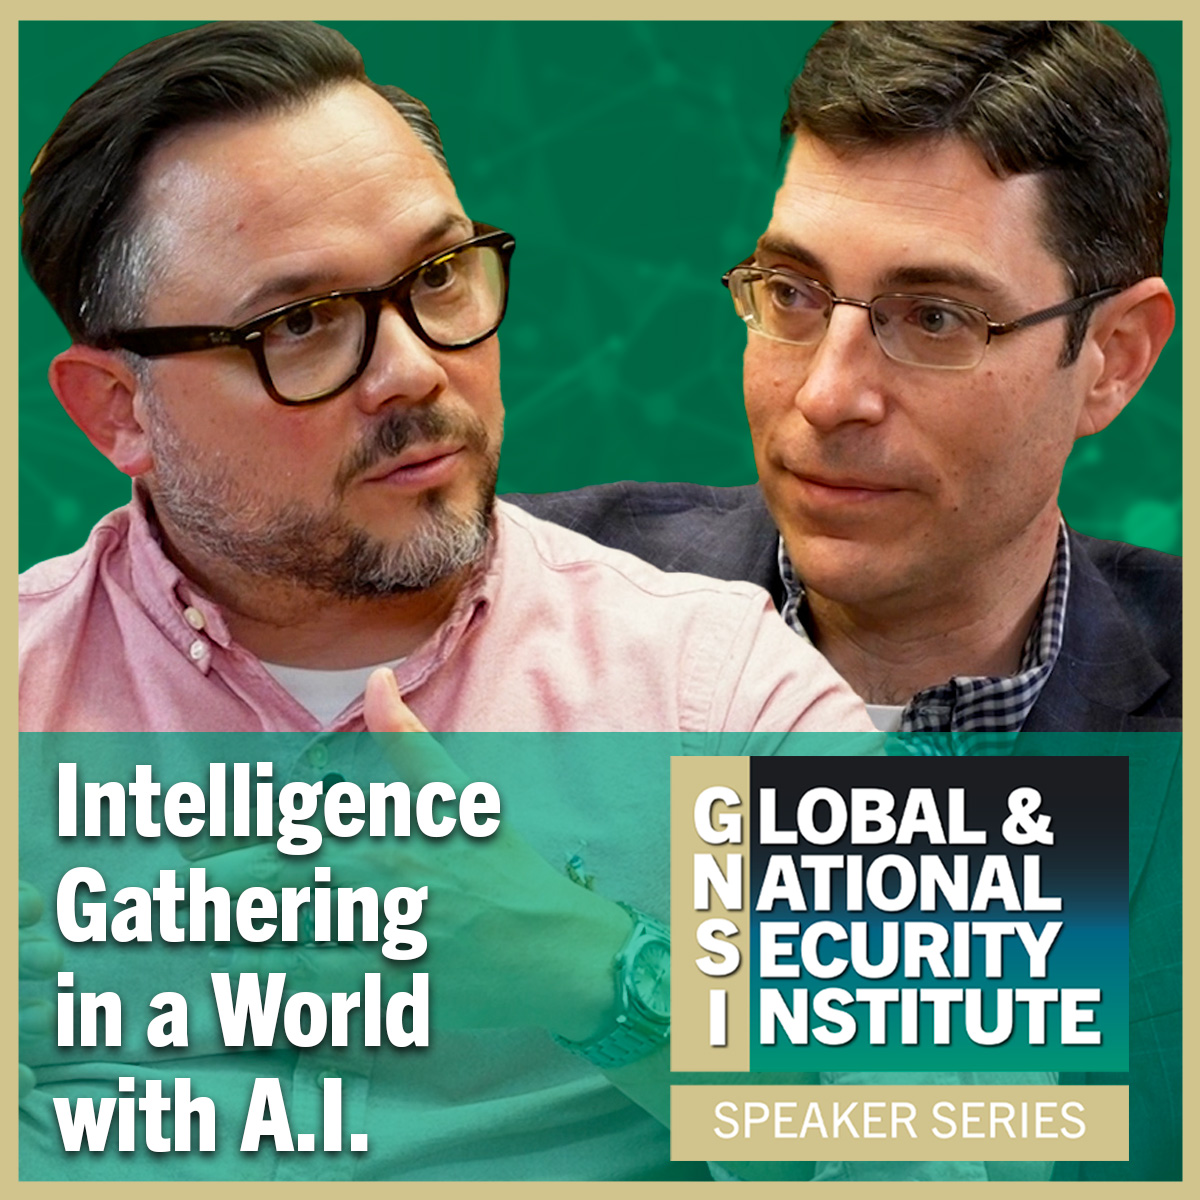 Join GNSI’s Academic Director, David Oakley, PhD, and visiting Professor David Gioe, PhD, as they discuss A.I.'s role in intelligence and security.

🎥Watch the video here
youtube.com/watch?v=seumv6…

#GNSI #Spycraft #ArtificialIntelligence #Security #Intelligence #AI #WarStudies